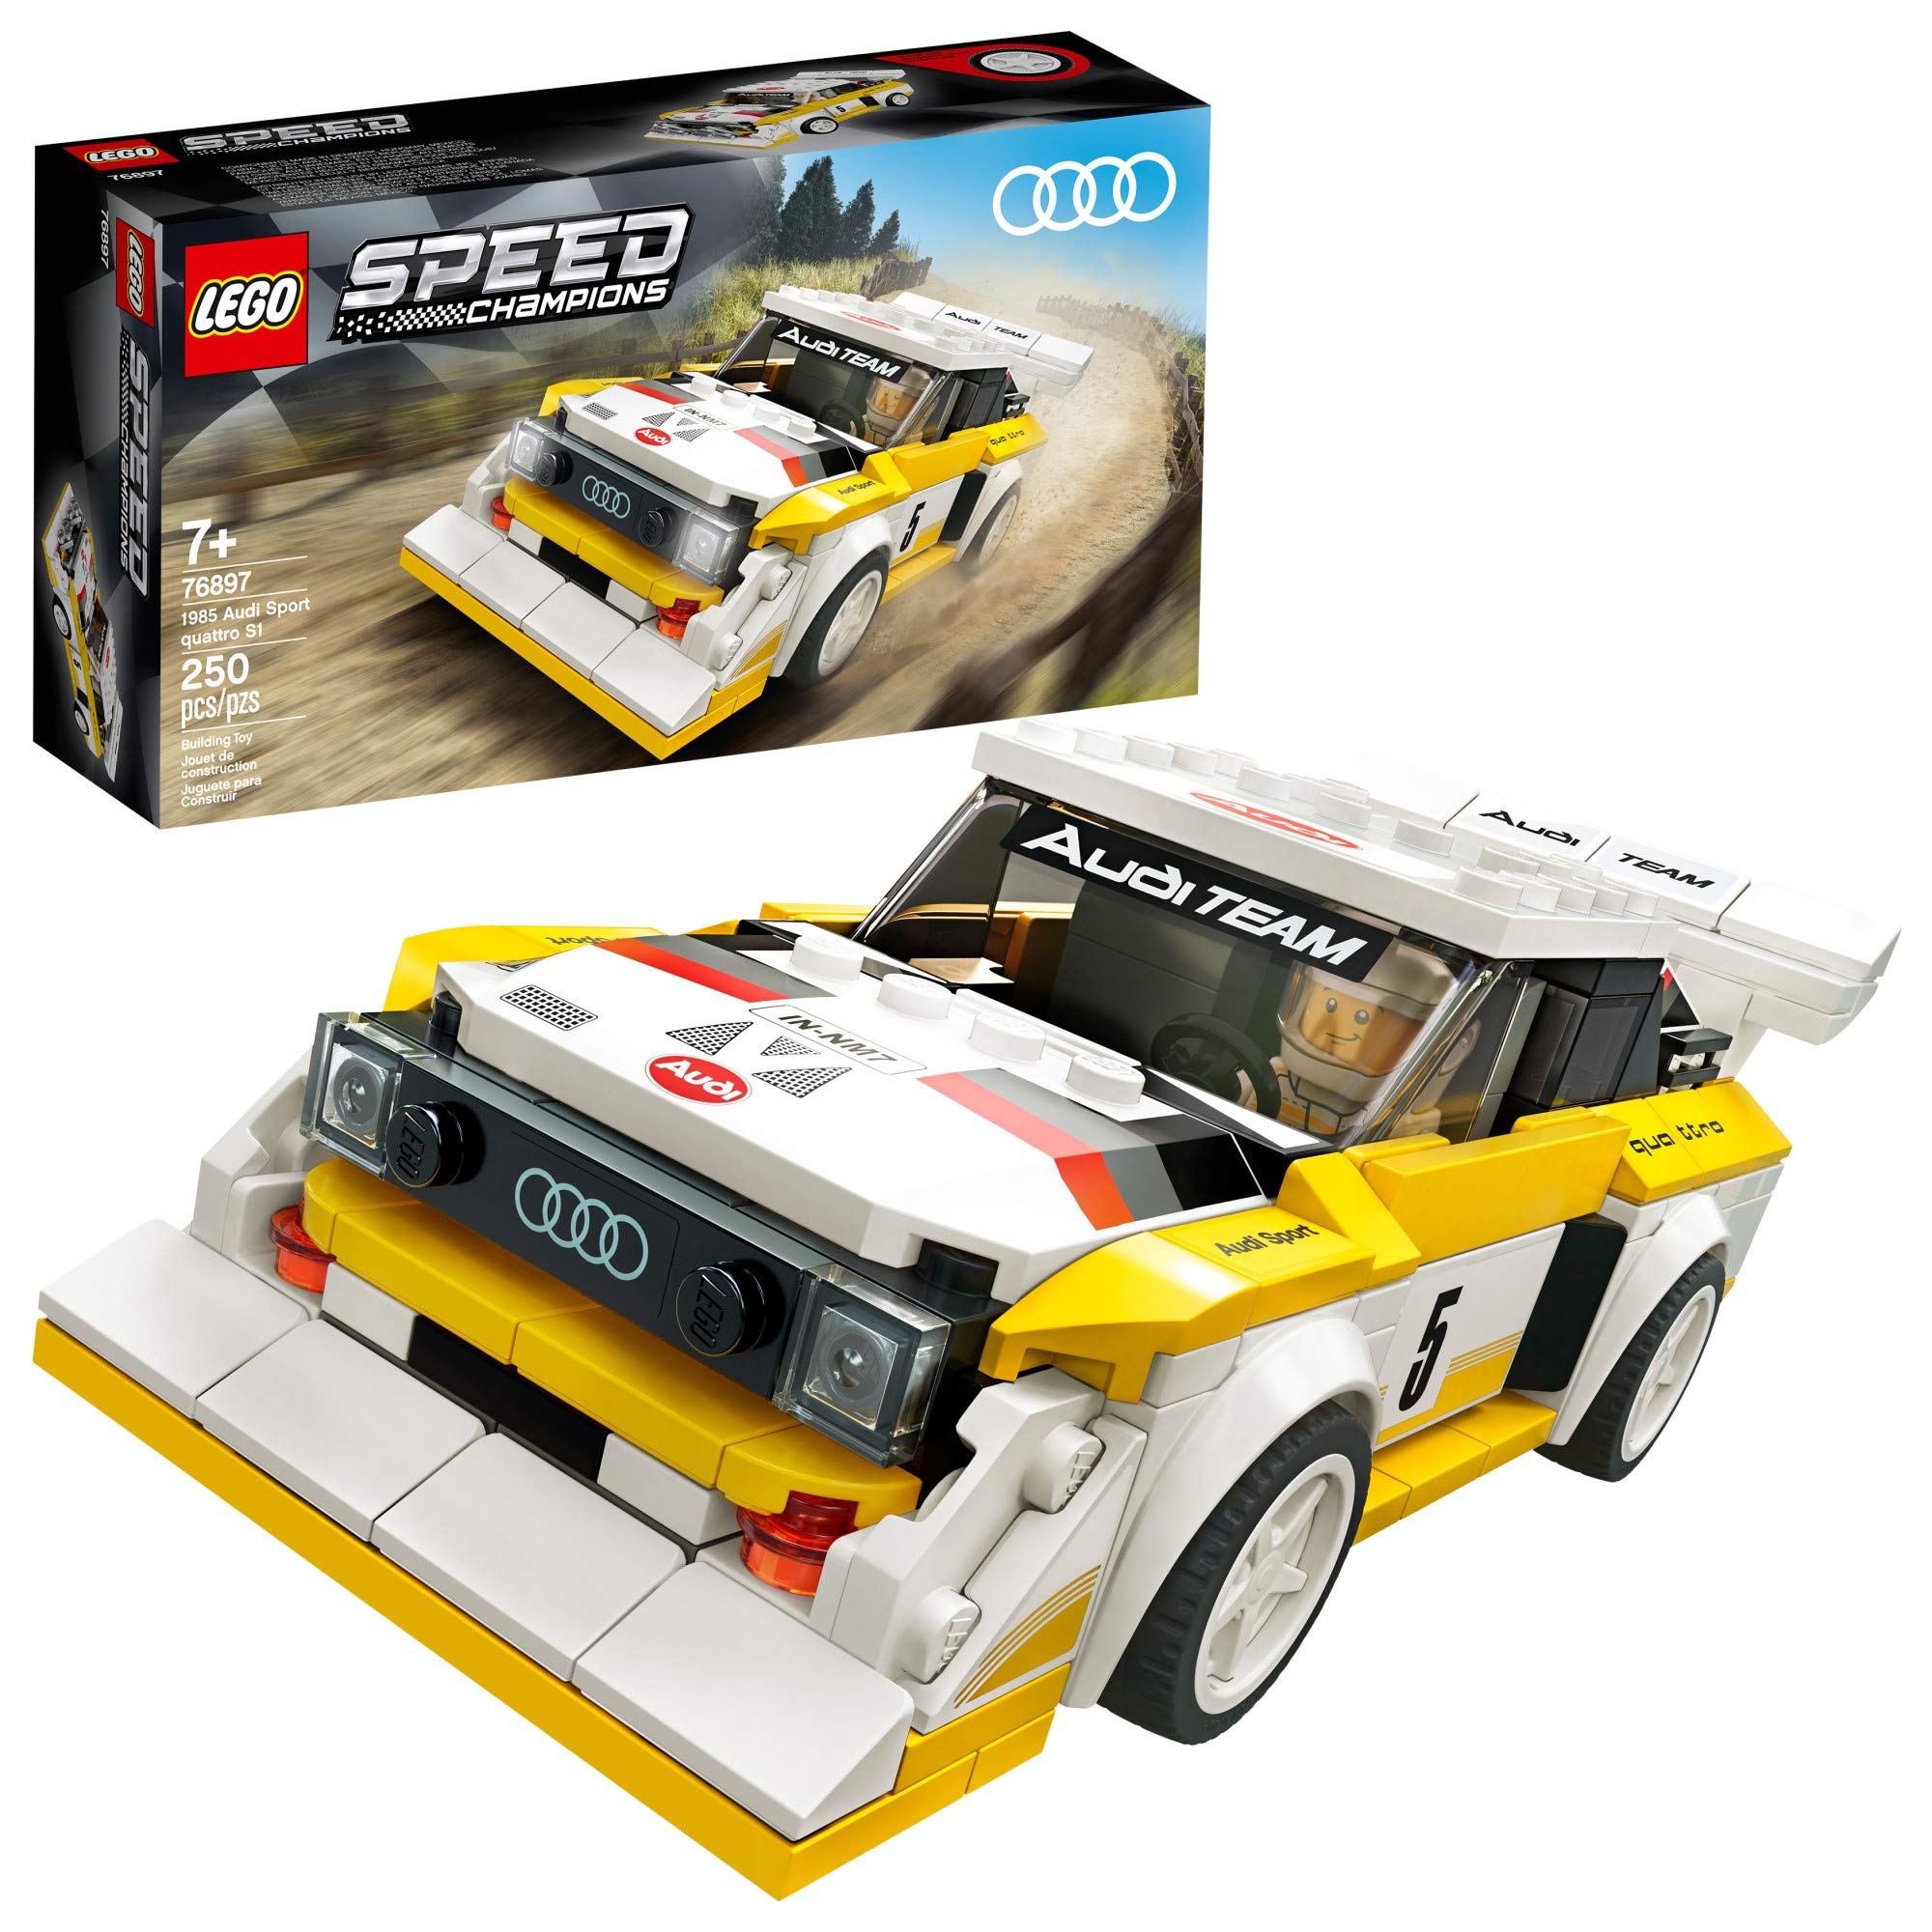 LEGO Speed Champions 1985 Audi Sport Quattro S1 76897 Toy Cars for Kids Building Kit Featuring Driver Minifigure (250 Pieces) (Like New, Open Box)